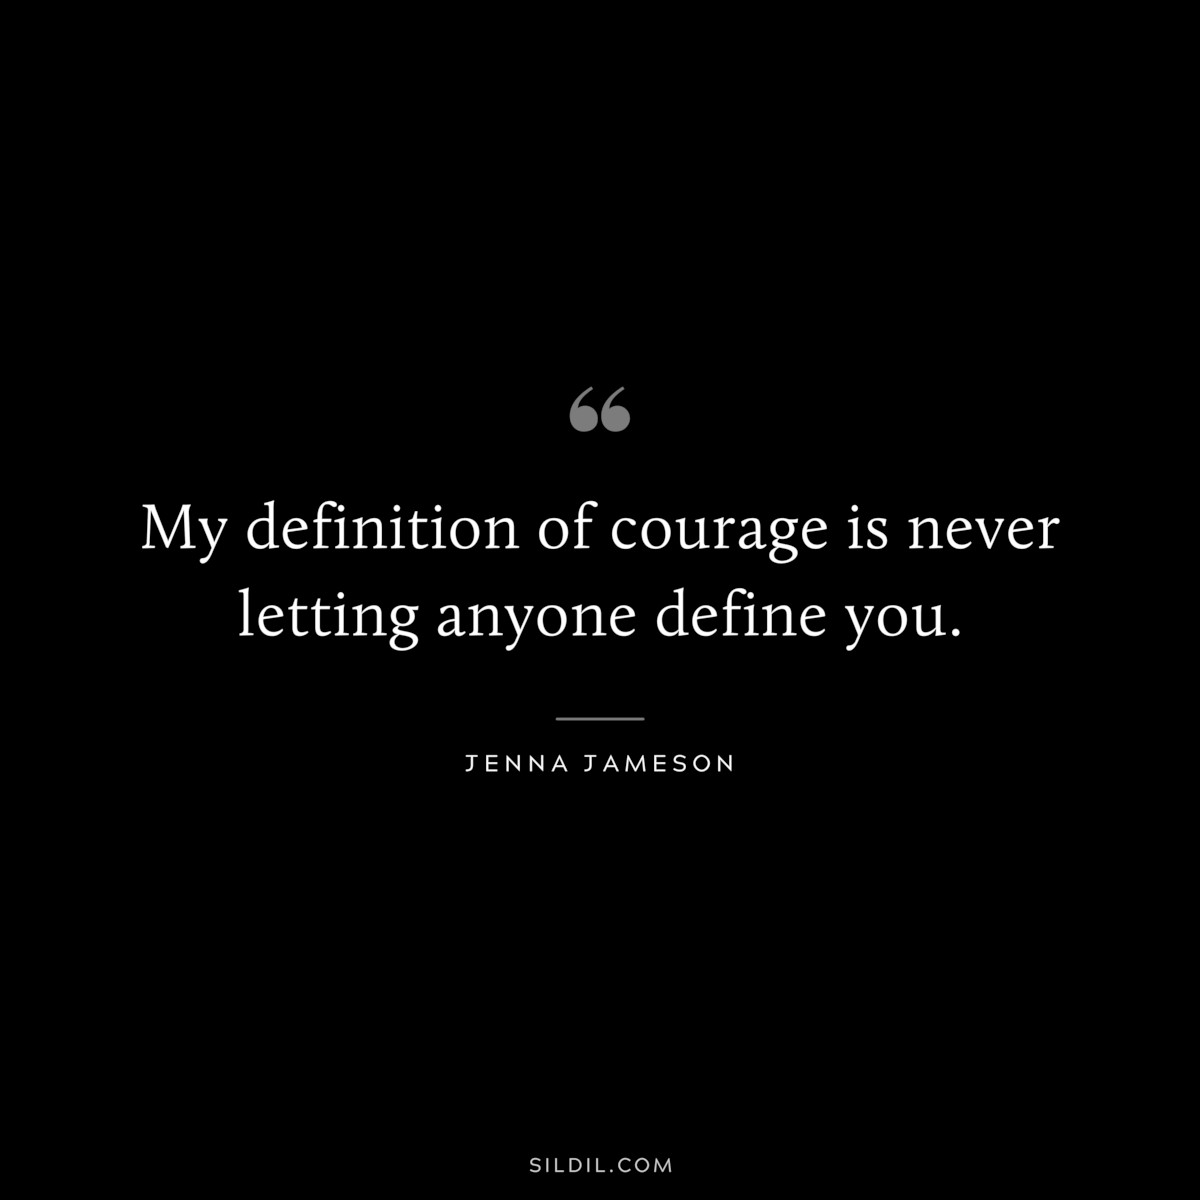 My definition of courage is never letting anyone define you. ― Jenna Jameson